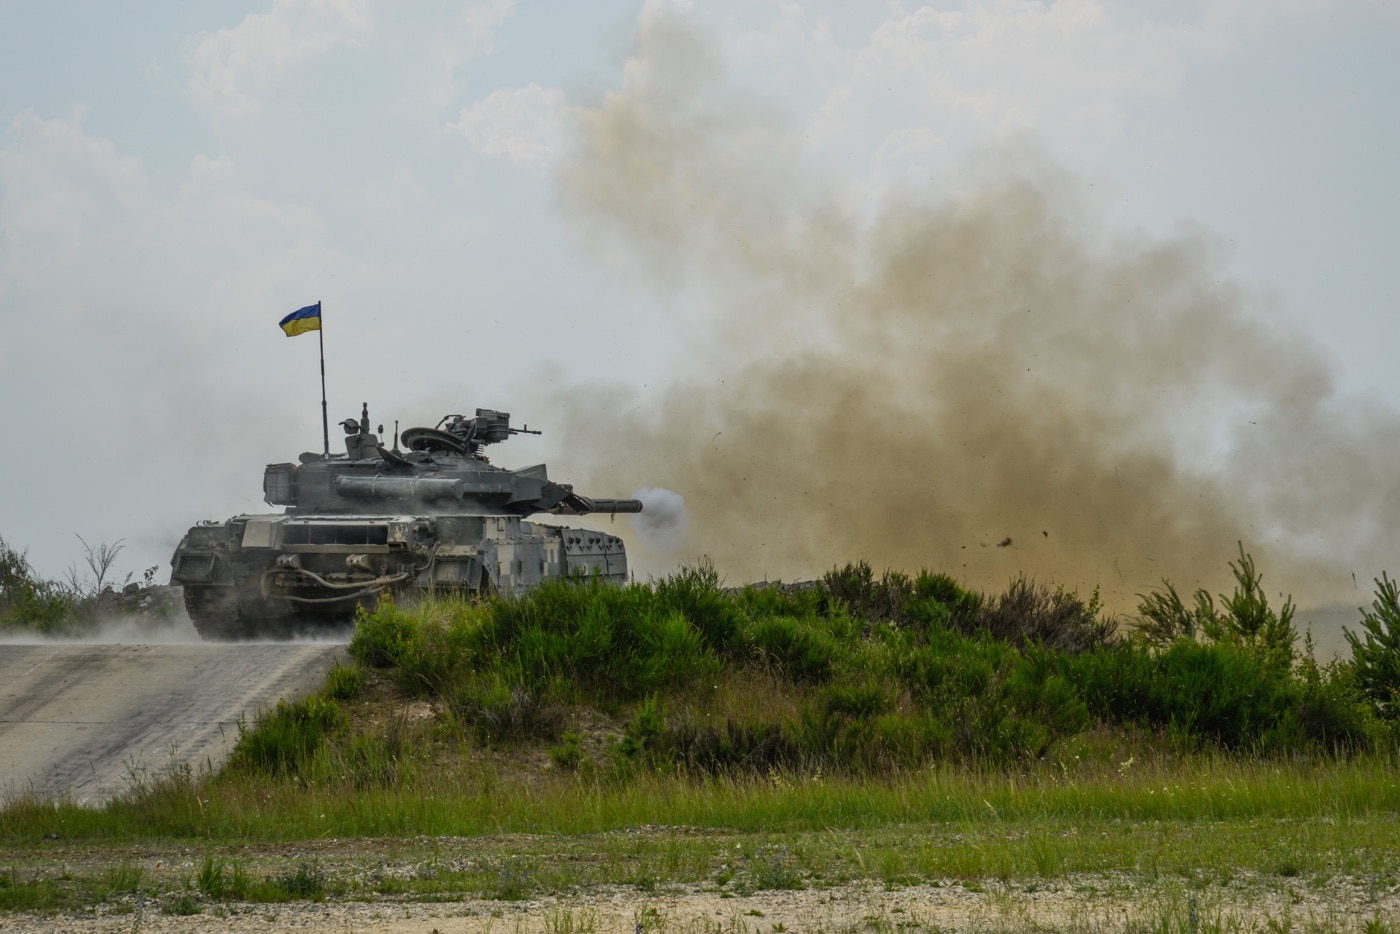 Here we see T-84 tank troops train with main gun on the firing range. Smoke fills the air as the recoil rocks the tank backward in its firing position.